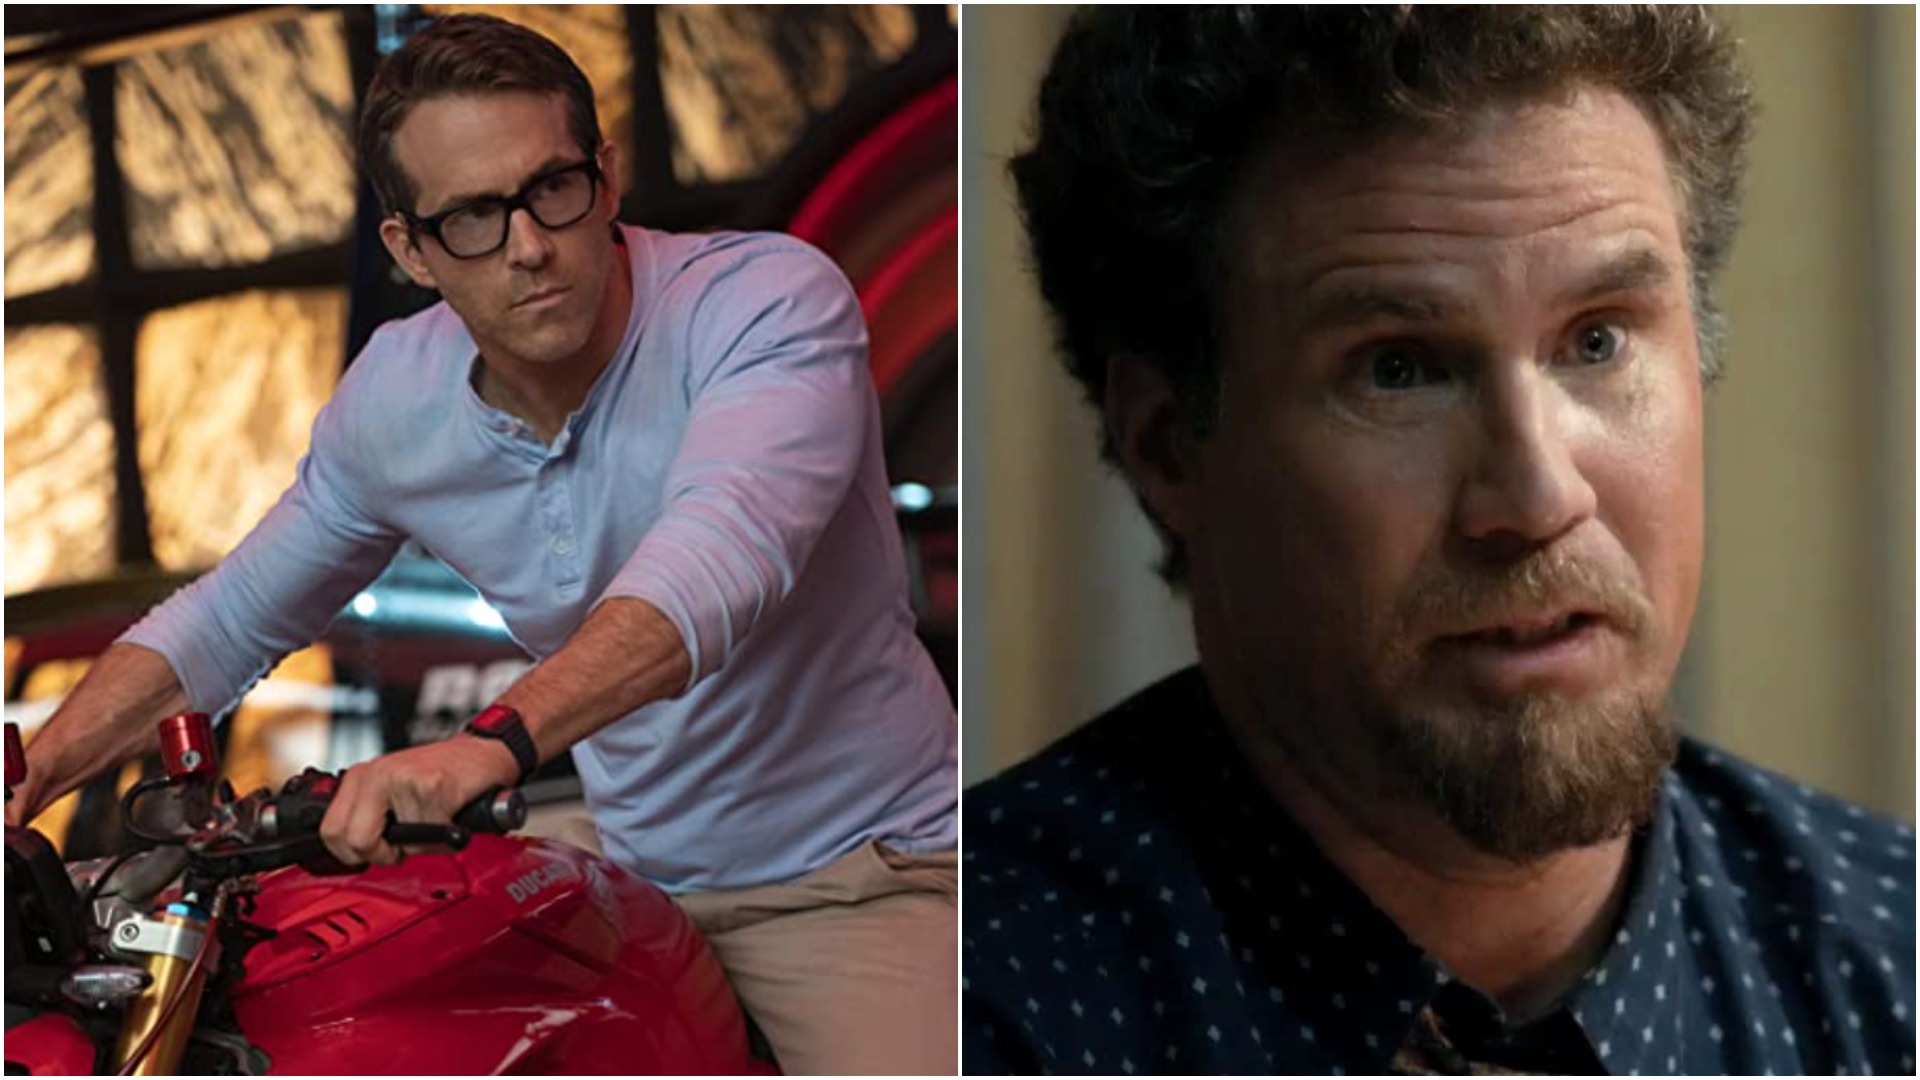 Spirited' review: Will Ferrell, Ryan Reynolds take on 'A Christmas